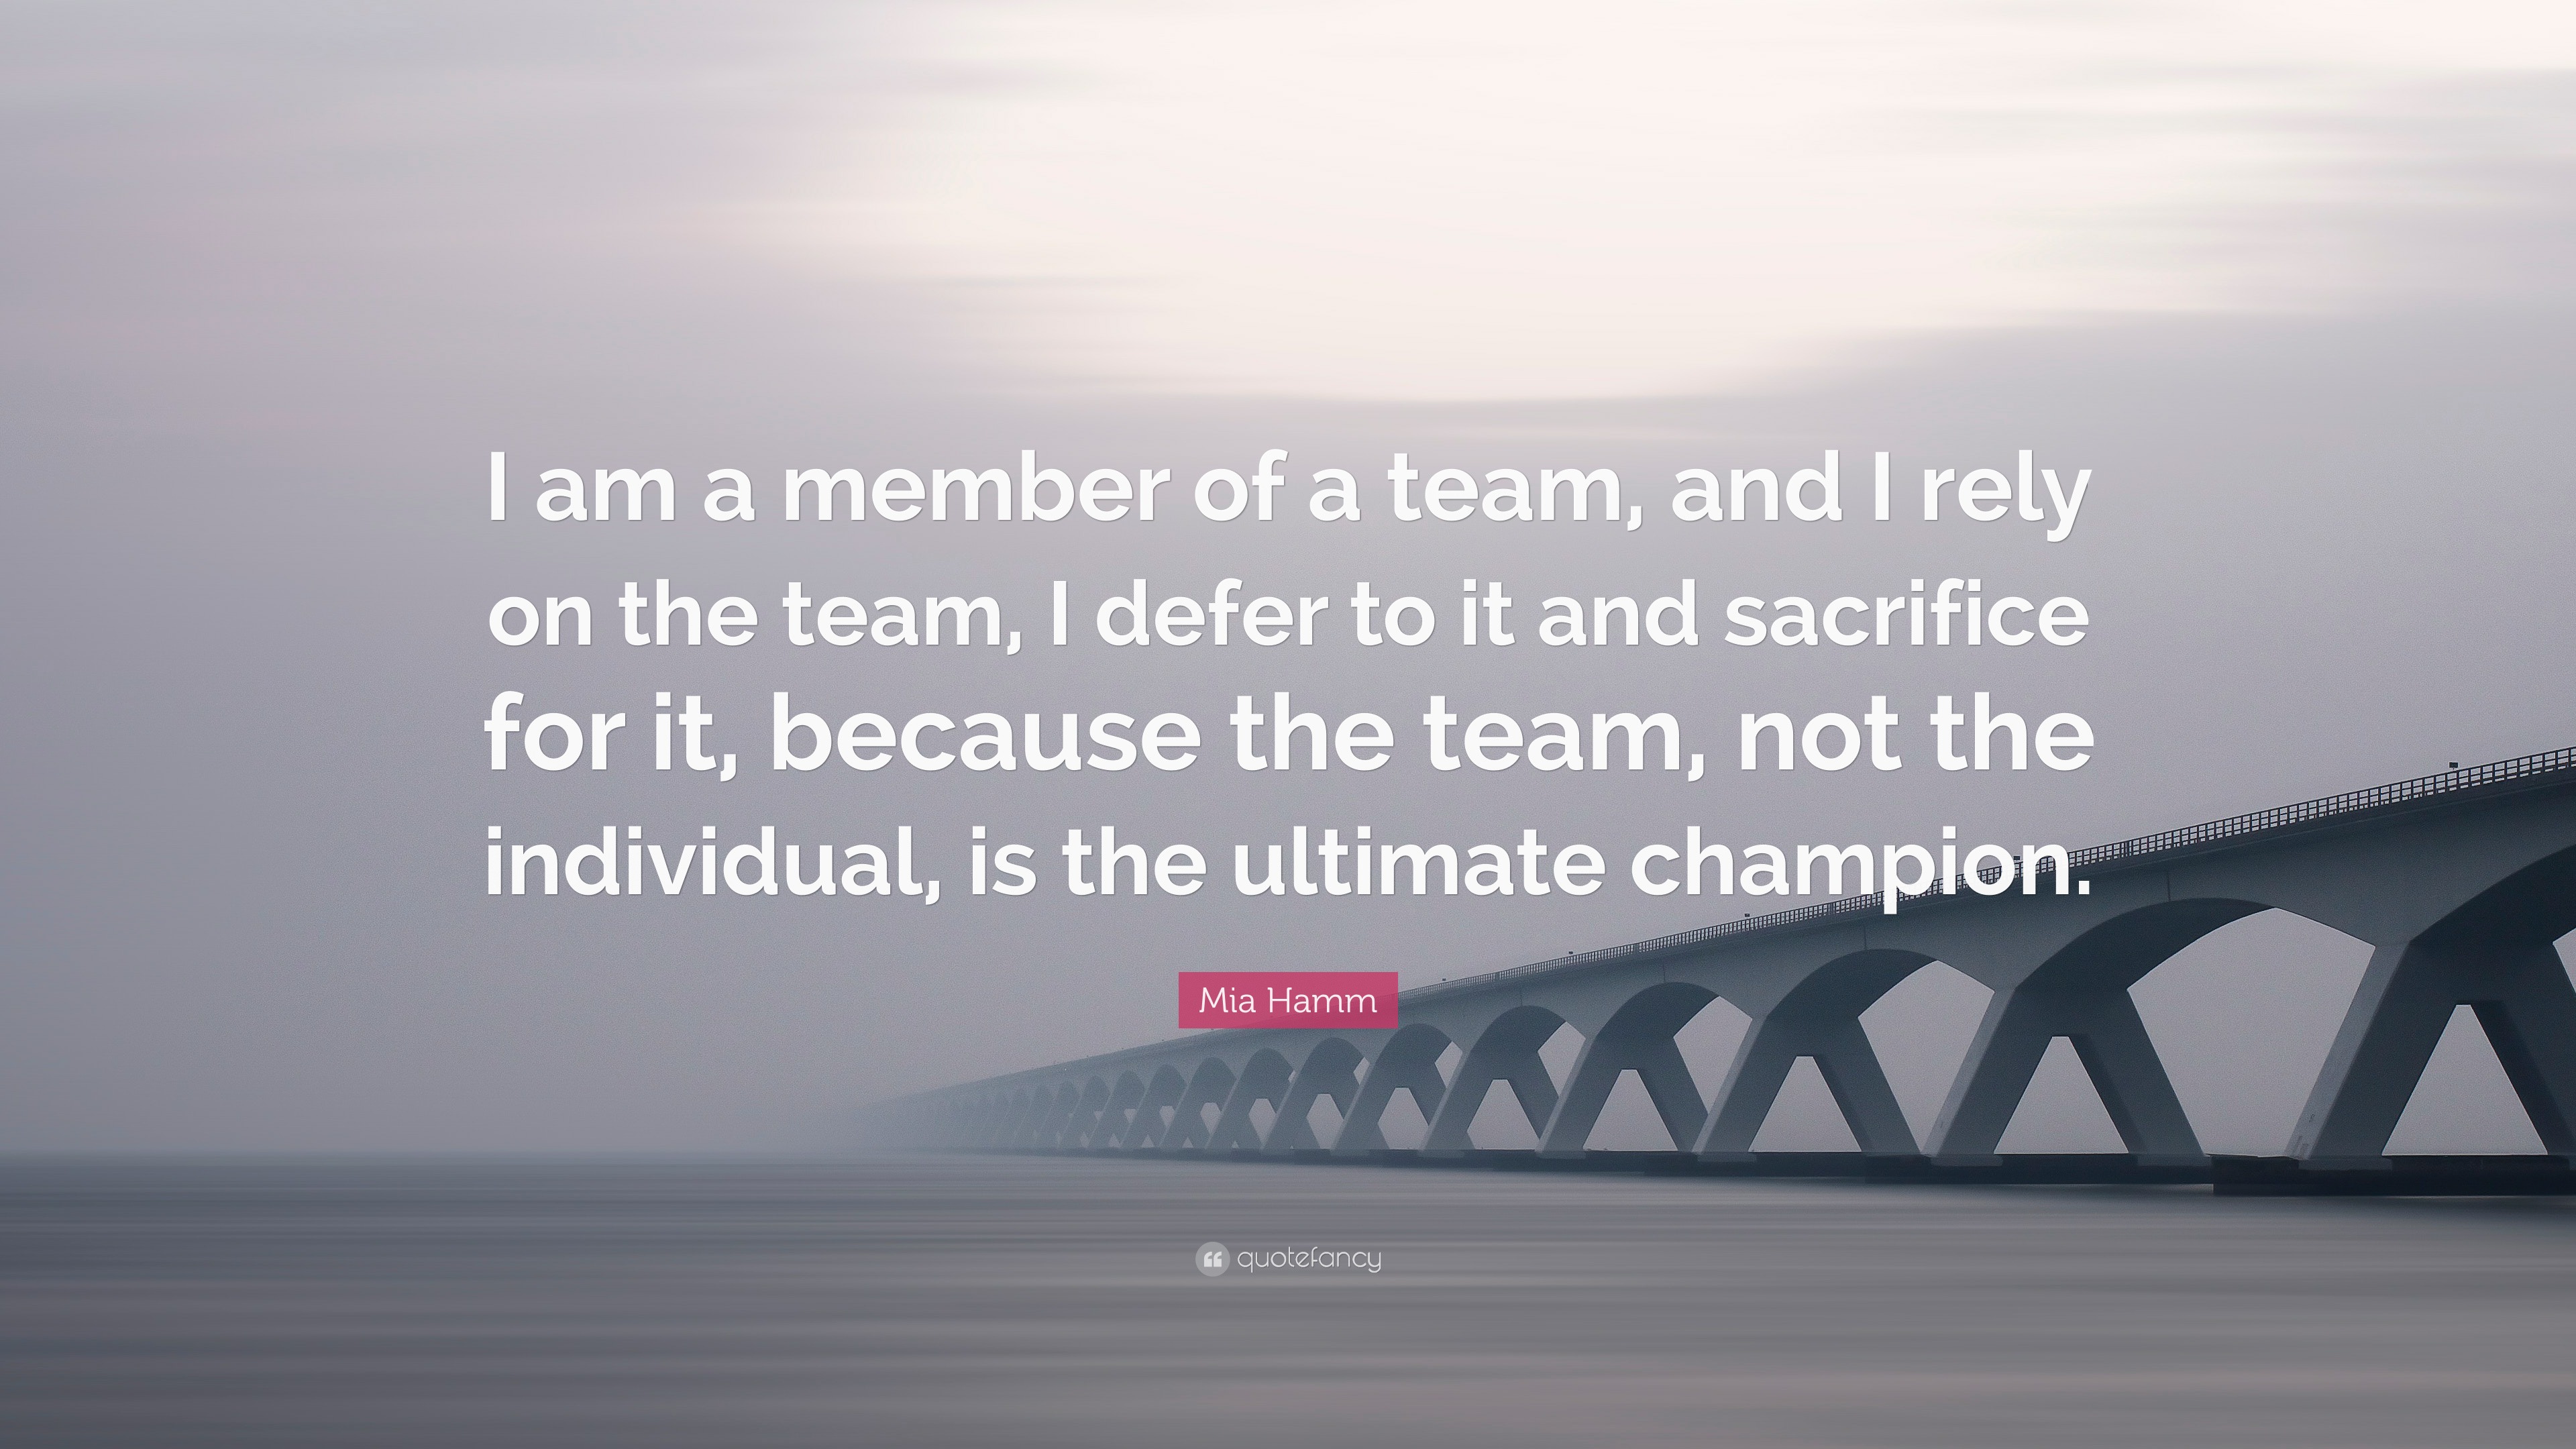 Mia Hamm Quote: “I am a member of a team, and I rely on the team, I defer  to it and sacrifice for it, because the team, not the individua”